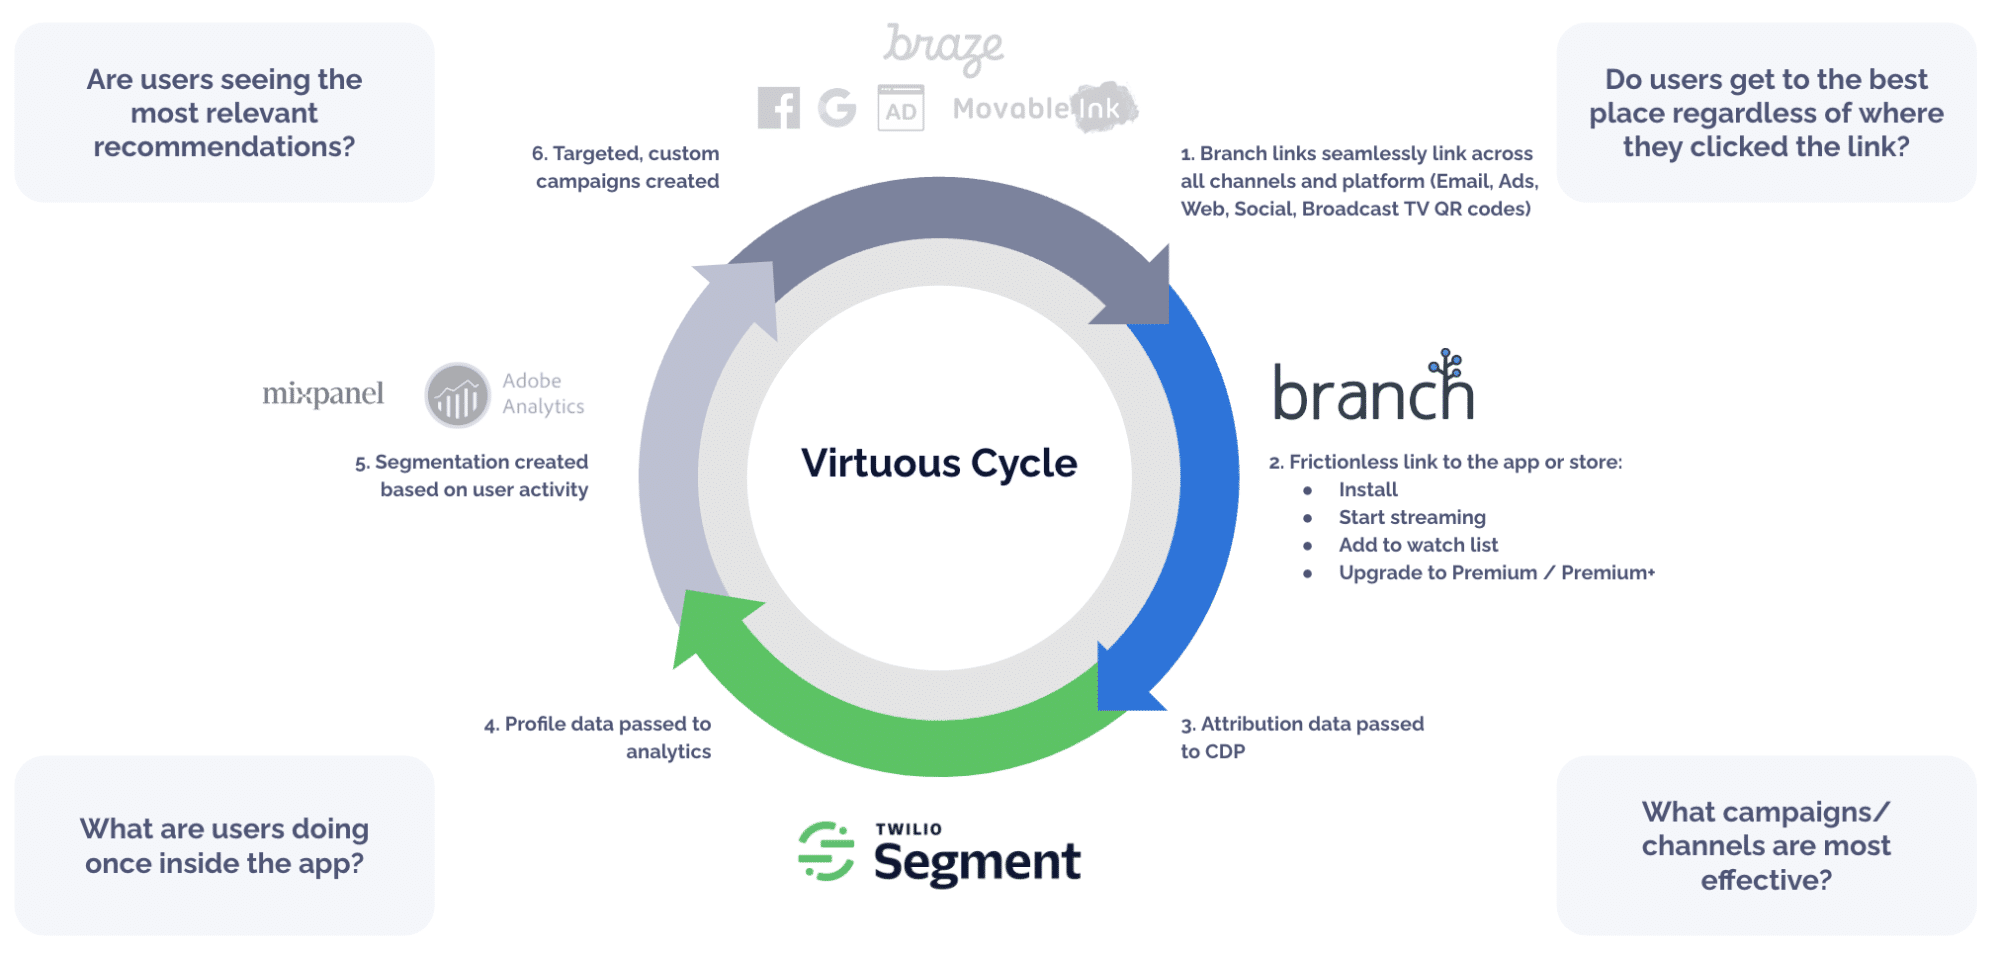 Lifecycle chart showing how Branch and Twilio Segment work together. Branch ensures a frictionless link to the app or store. Then, attribution data is exported to Twilio Segment. The flow ensures users get to the best place regardless of where the click a link, and that marketers can tell which campaigns / channels are most effective. 